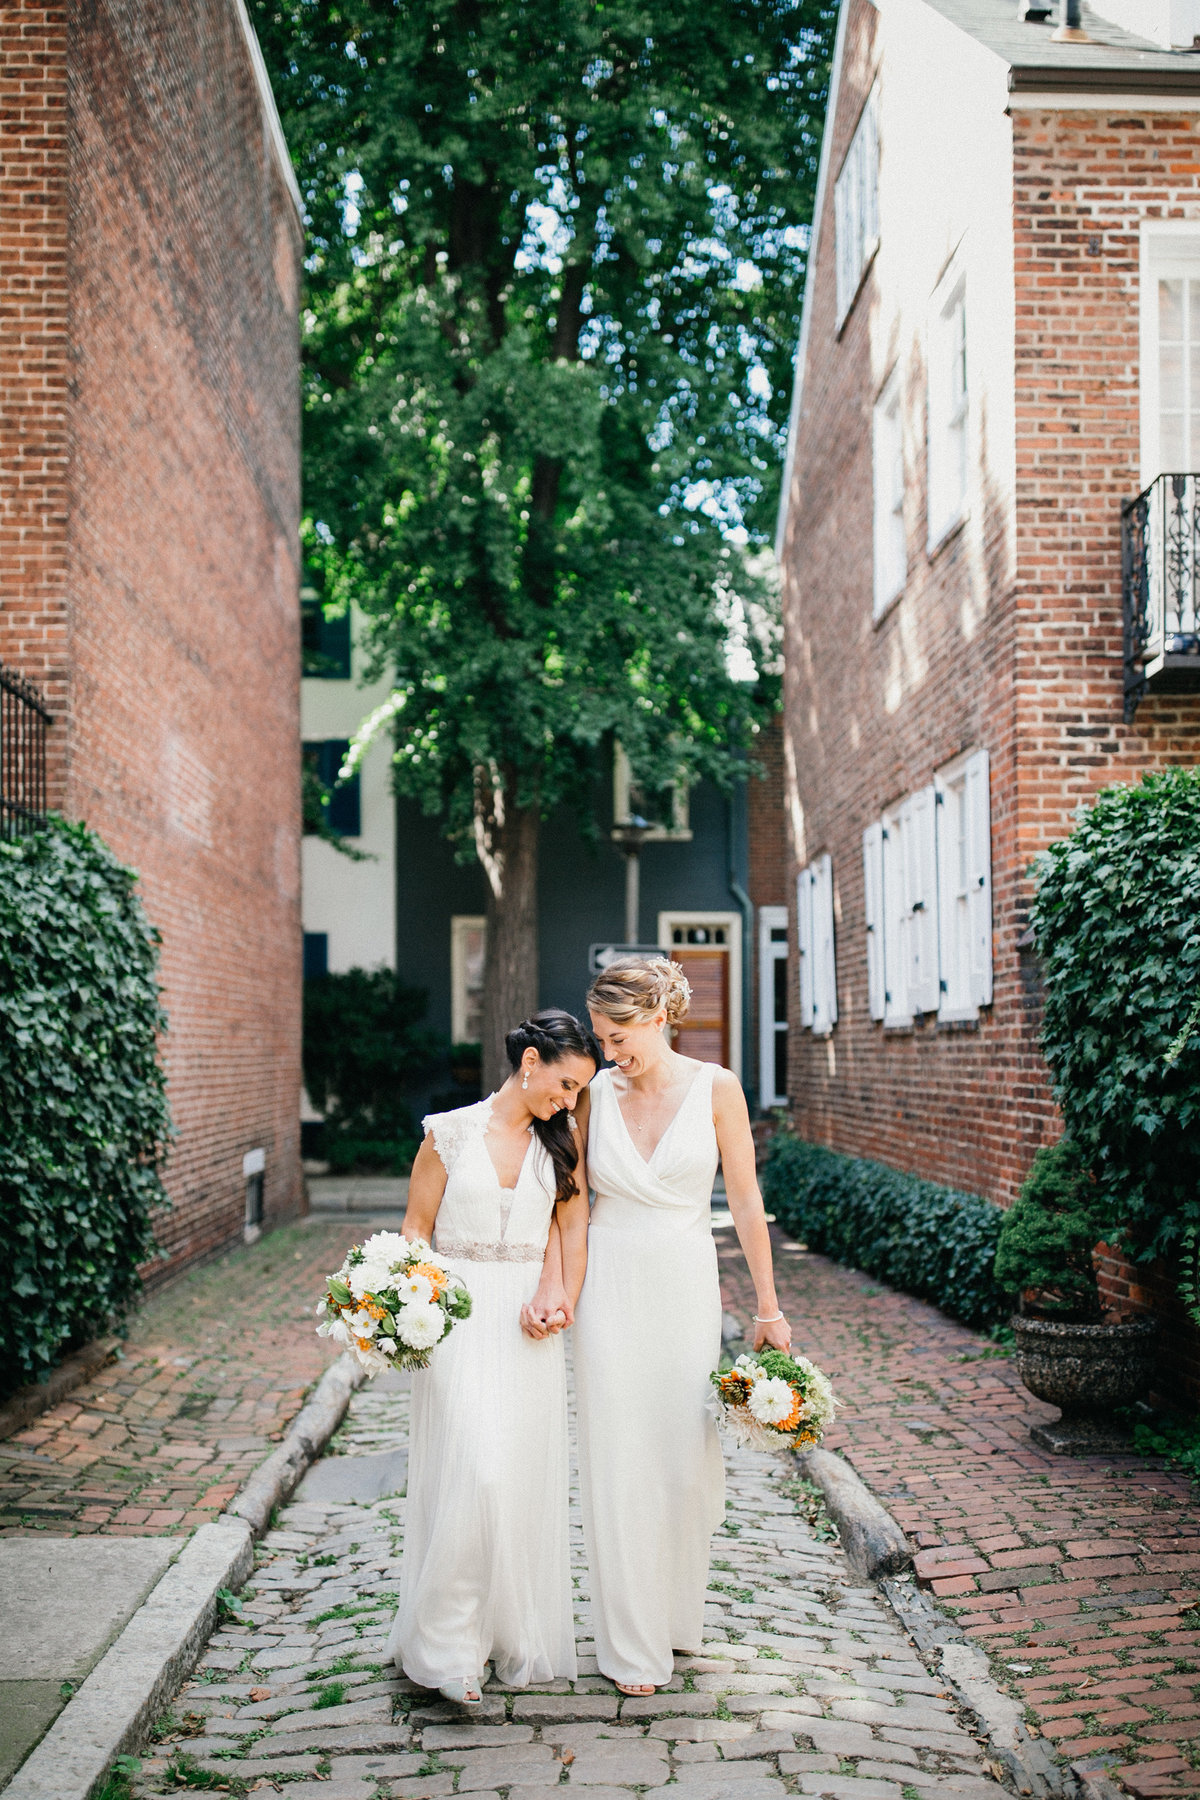 Two brides photographed in Old City, Philadelphia before their ceremony.